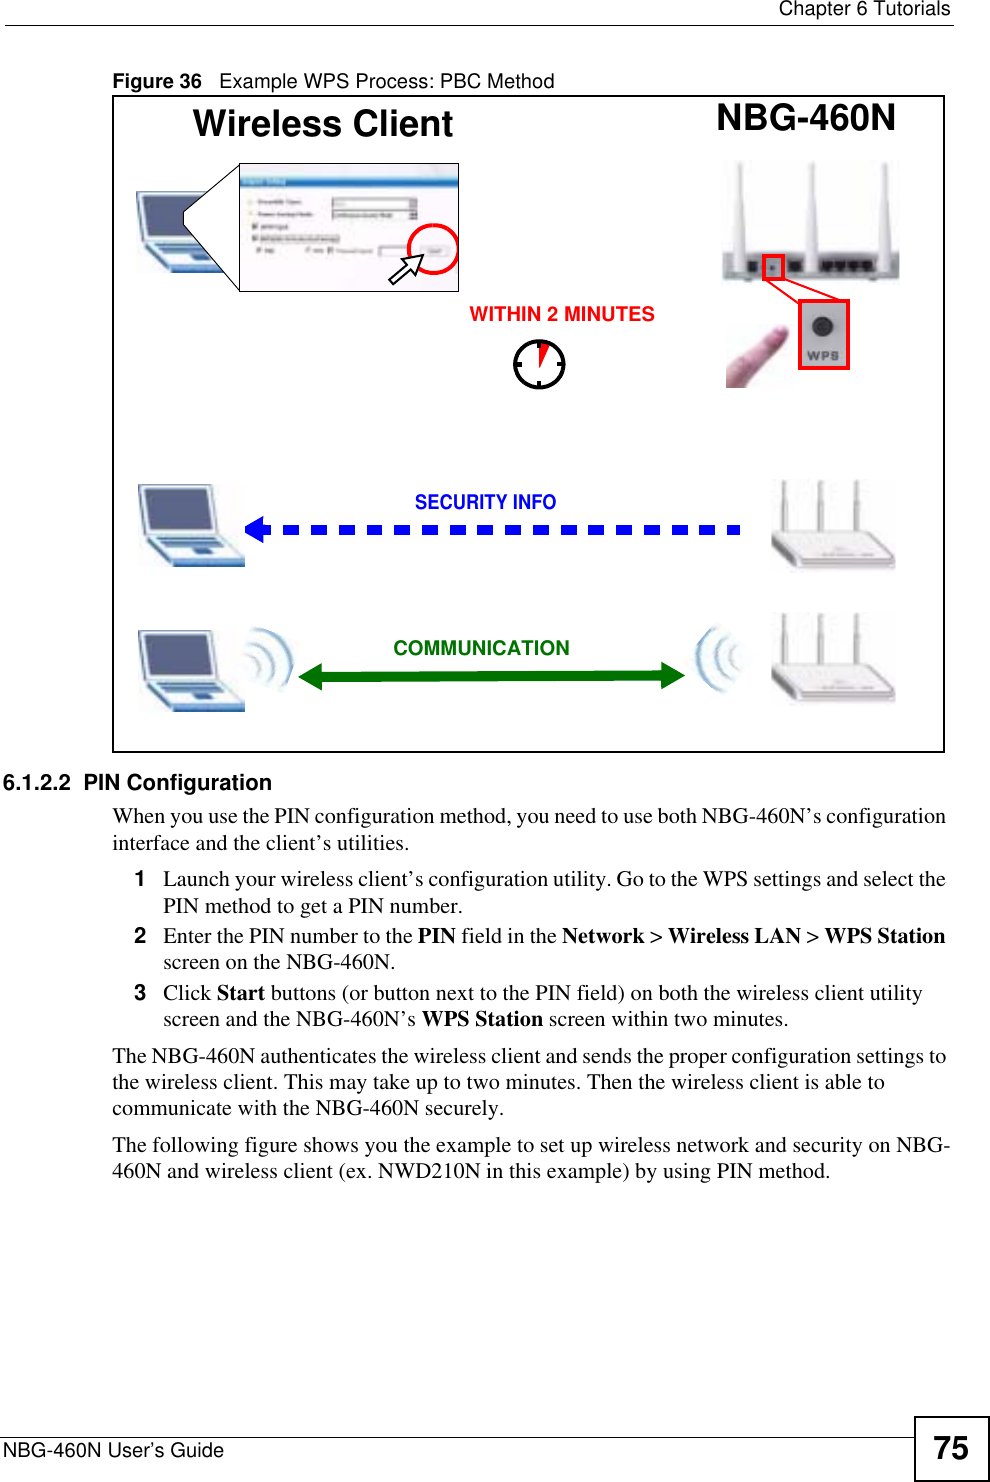  Chapter 6 TutorialsNBG-460N User’s Guide 75Figure 36   Example WPS Process: PBC Method6.1.2.2  PIN ConfigurationWhen you use the PIN configuration method, you need to use both NBG-460N’s configuration interface and the client’s utilities.1Launch your wireless client’s configuration utility. Go to the WPS settings and select the PIN method to get a PIN number.2Enter the PIN number to the PIN field in the Network &gt; Wireless LAN &gt;WPS Stationscreen on the NBG-460N.3Click Start buttons (or button next to the PIN field) on both the wireless client utility screen and the NBG-460N’s WPS Station screen within two minutes.The NBG-460N authenticates the wireless client and sends the proper configuration settings to the wireless client. This may take up to two minutes. Then the wireless client is able to communicate with the NBG-460N securely. The following figure shows you the example to set up wireless network and security on NBG-460N and wireless client (ex. NWD210N in this example) by using PIN method. Wireless Client    NBG-460NSECURITY INFOCOMMUNICATIONWITHIN 2 MINUTES